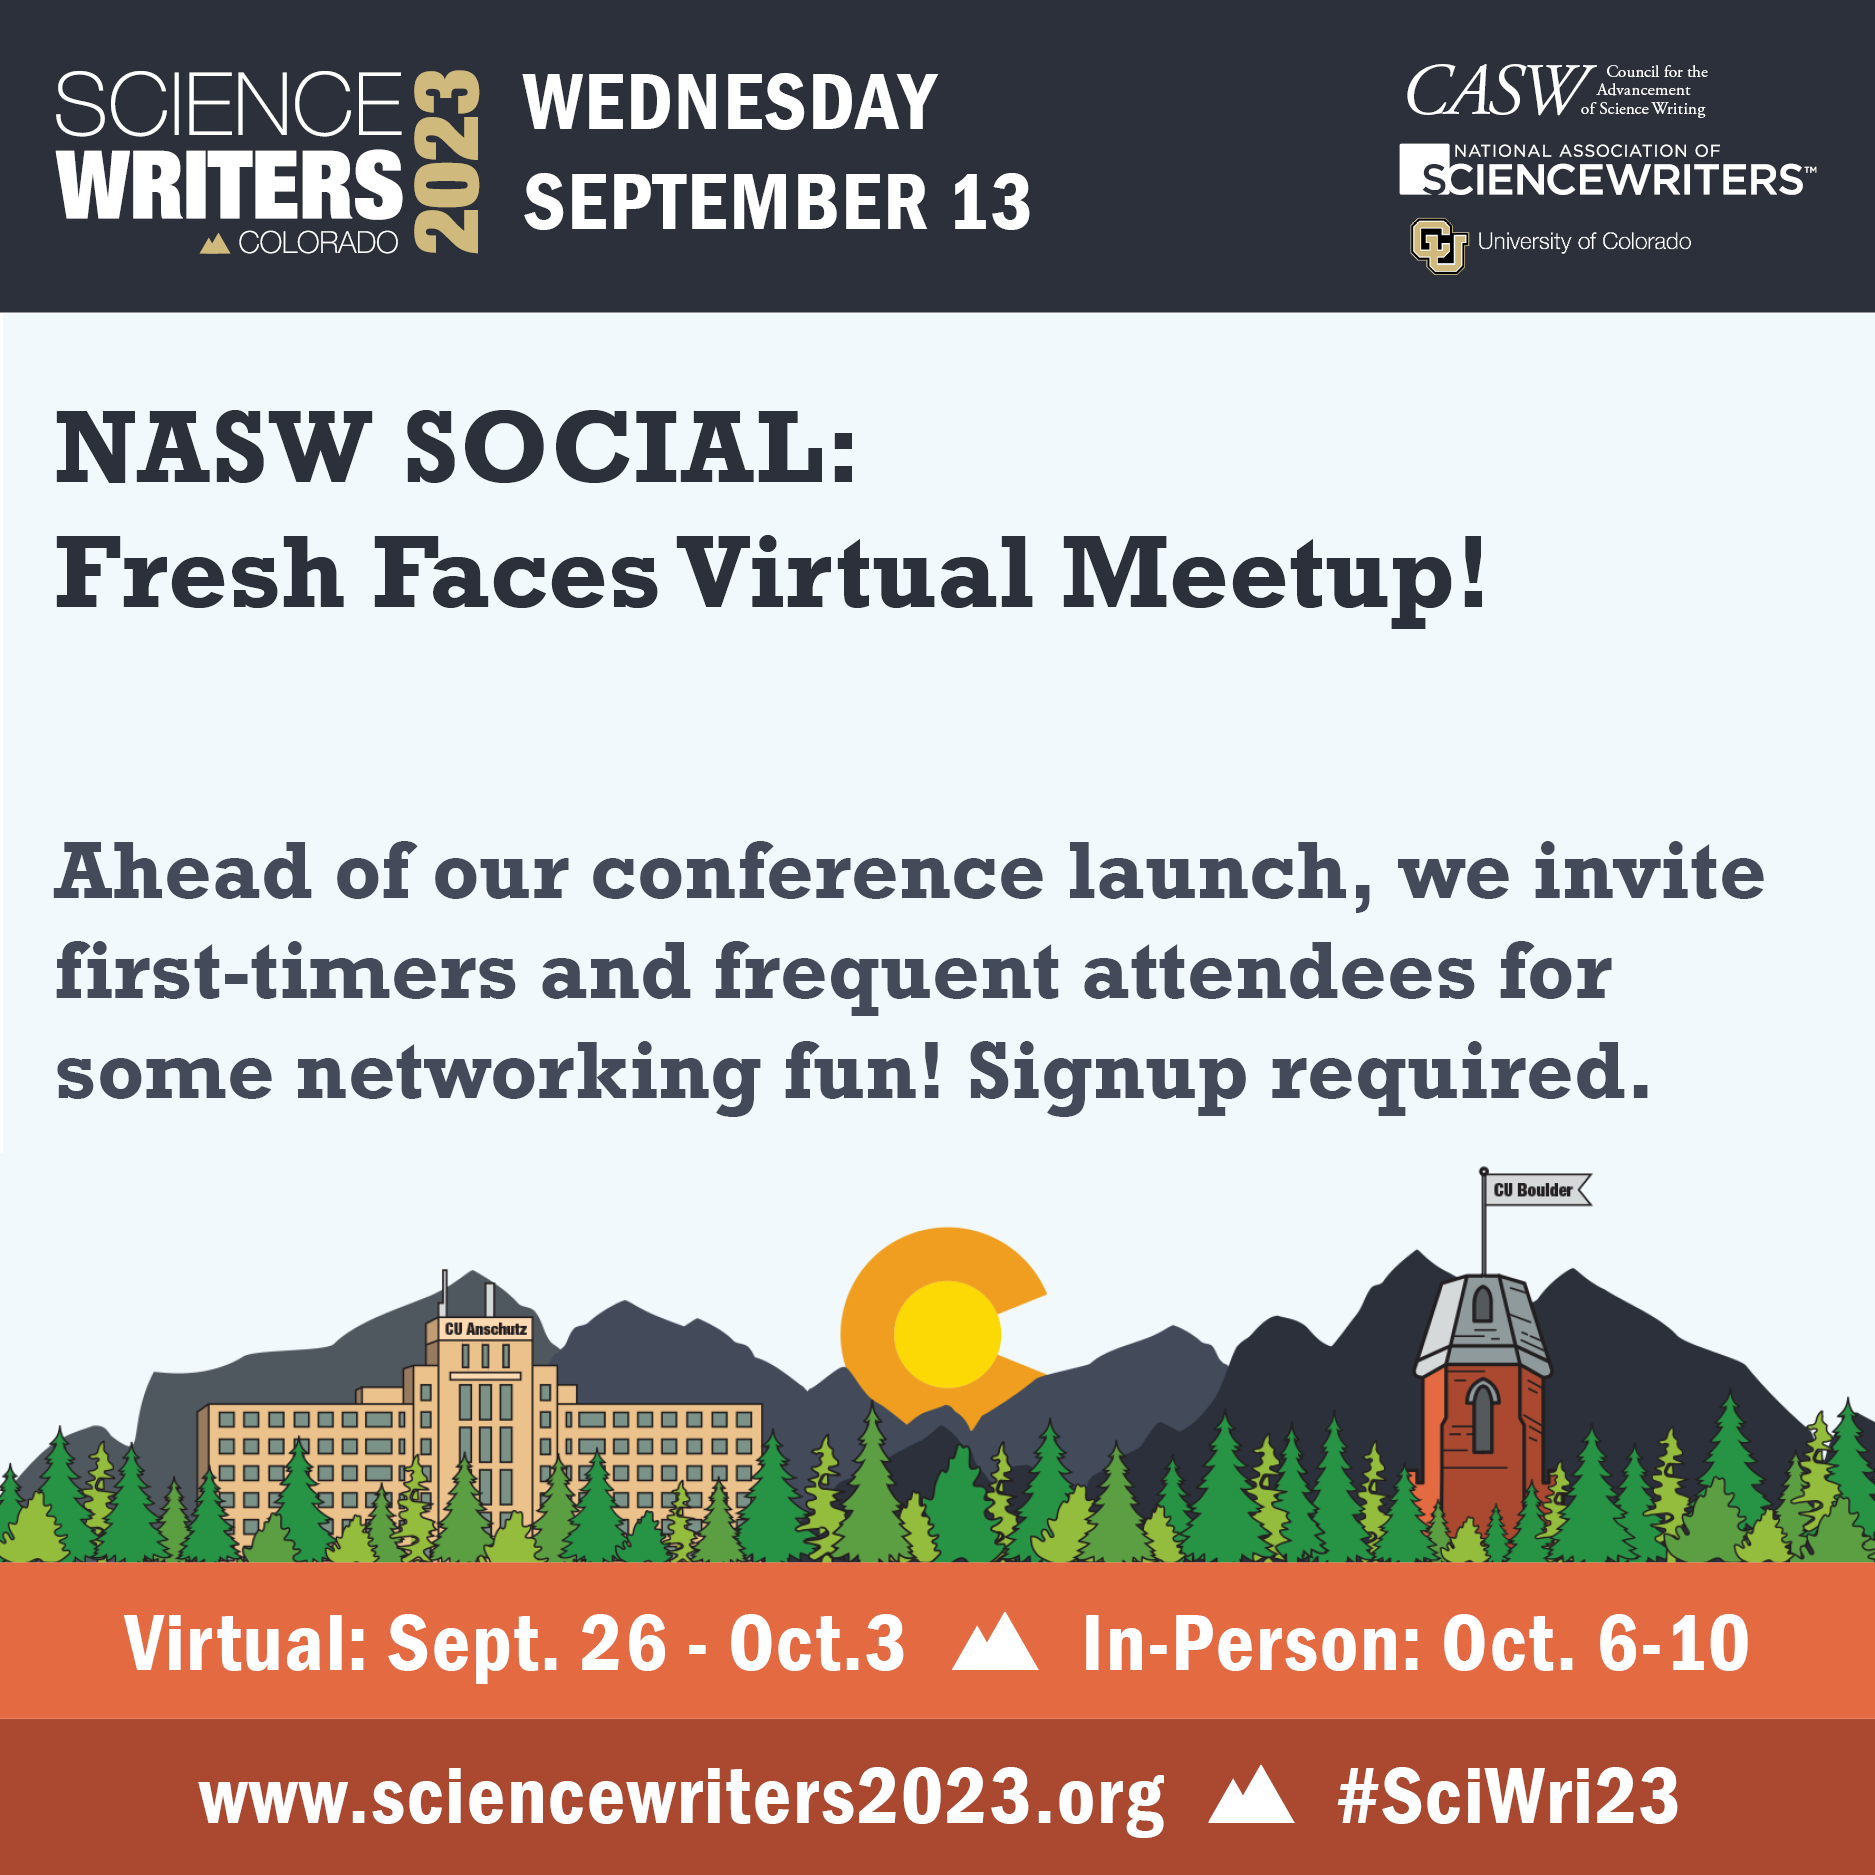 Square graphic boasting top banner with Science Writers 2023 Rockies logo and tagline Wednesday September 13. Copy reads: “NASW SOCIAL: Fresh Faces Virtual Meetup! Ahead of our conference launch, we invite first-timers and frequent attendees for some networking fun! Details in Whova." Center graphic is illustration of the Colorado mountains and conifer forest skyline with cartoons of the CU Anschutz medical building and the CU Boulder Old Main tower, along with the Colorado State flag "golden sun" letter C. Bottom banners tout the conference website, Sci Wri 23 hashtag, virtual dates September 26 to October 3, in person dates October 6 to 10.